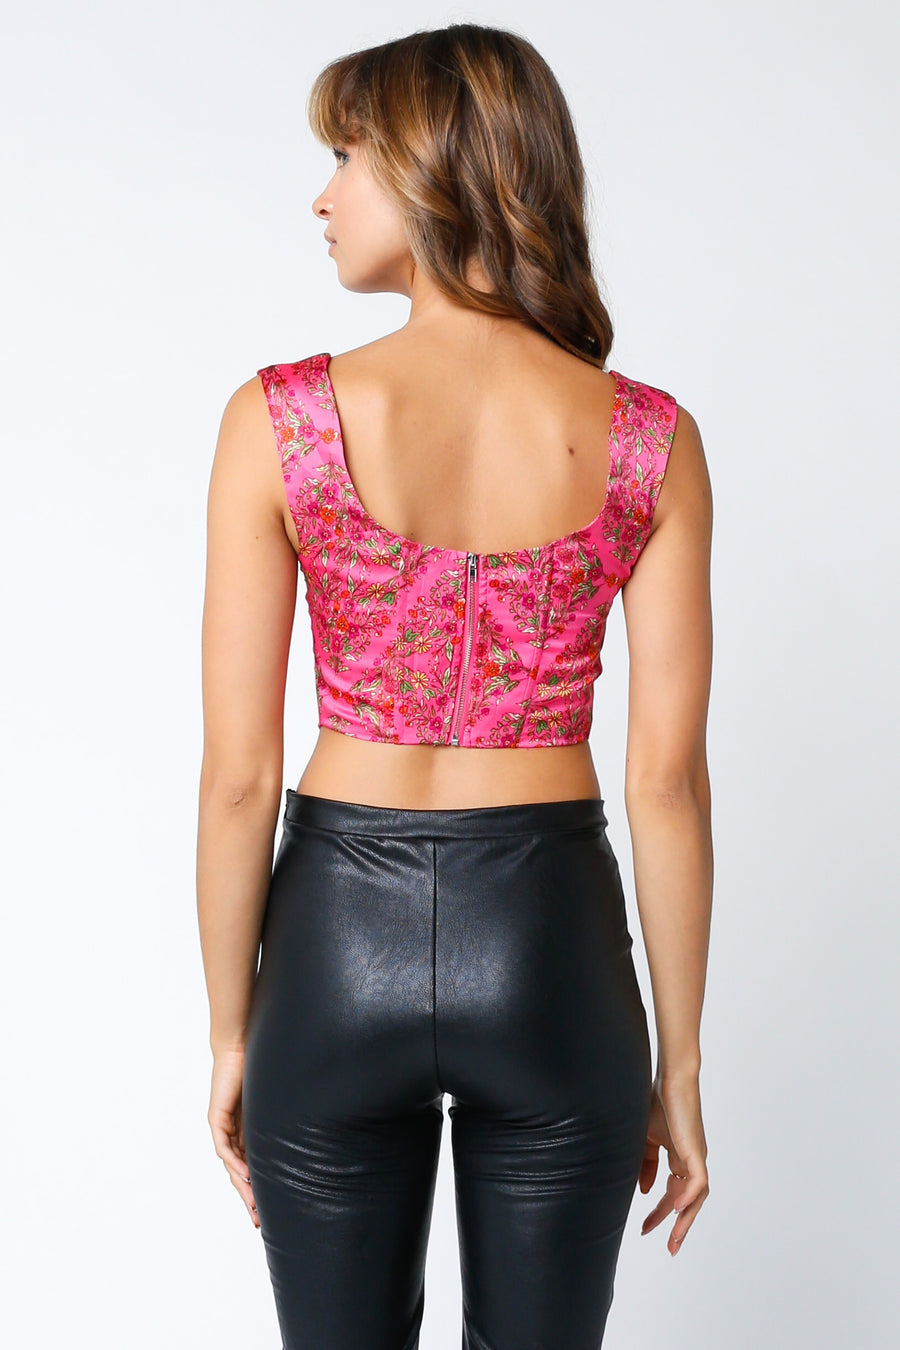 Cropped corset style top.